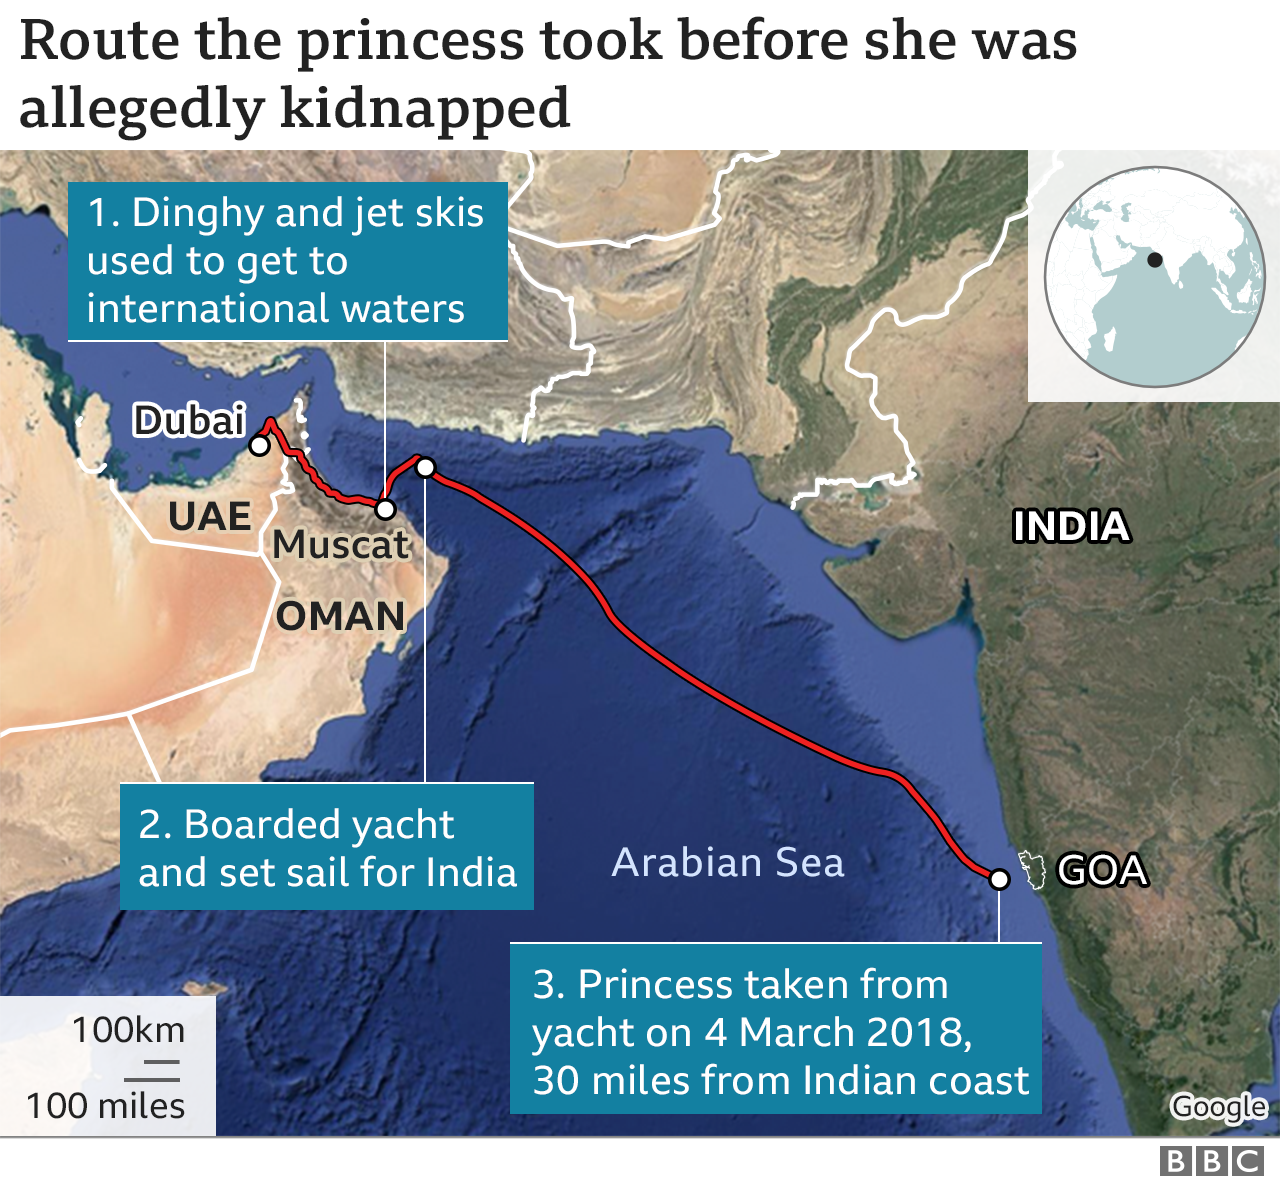 Map - the route the princess took before she was allegedly kidnapped